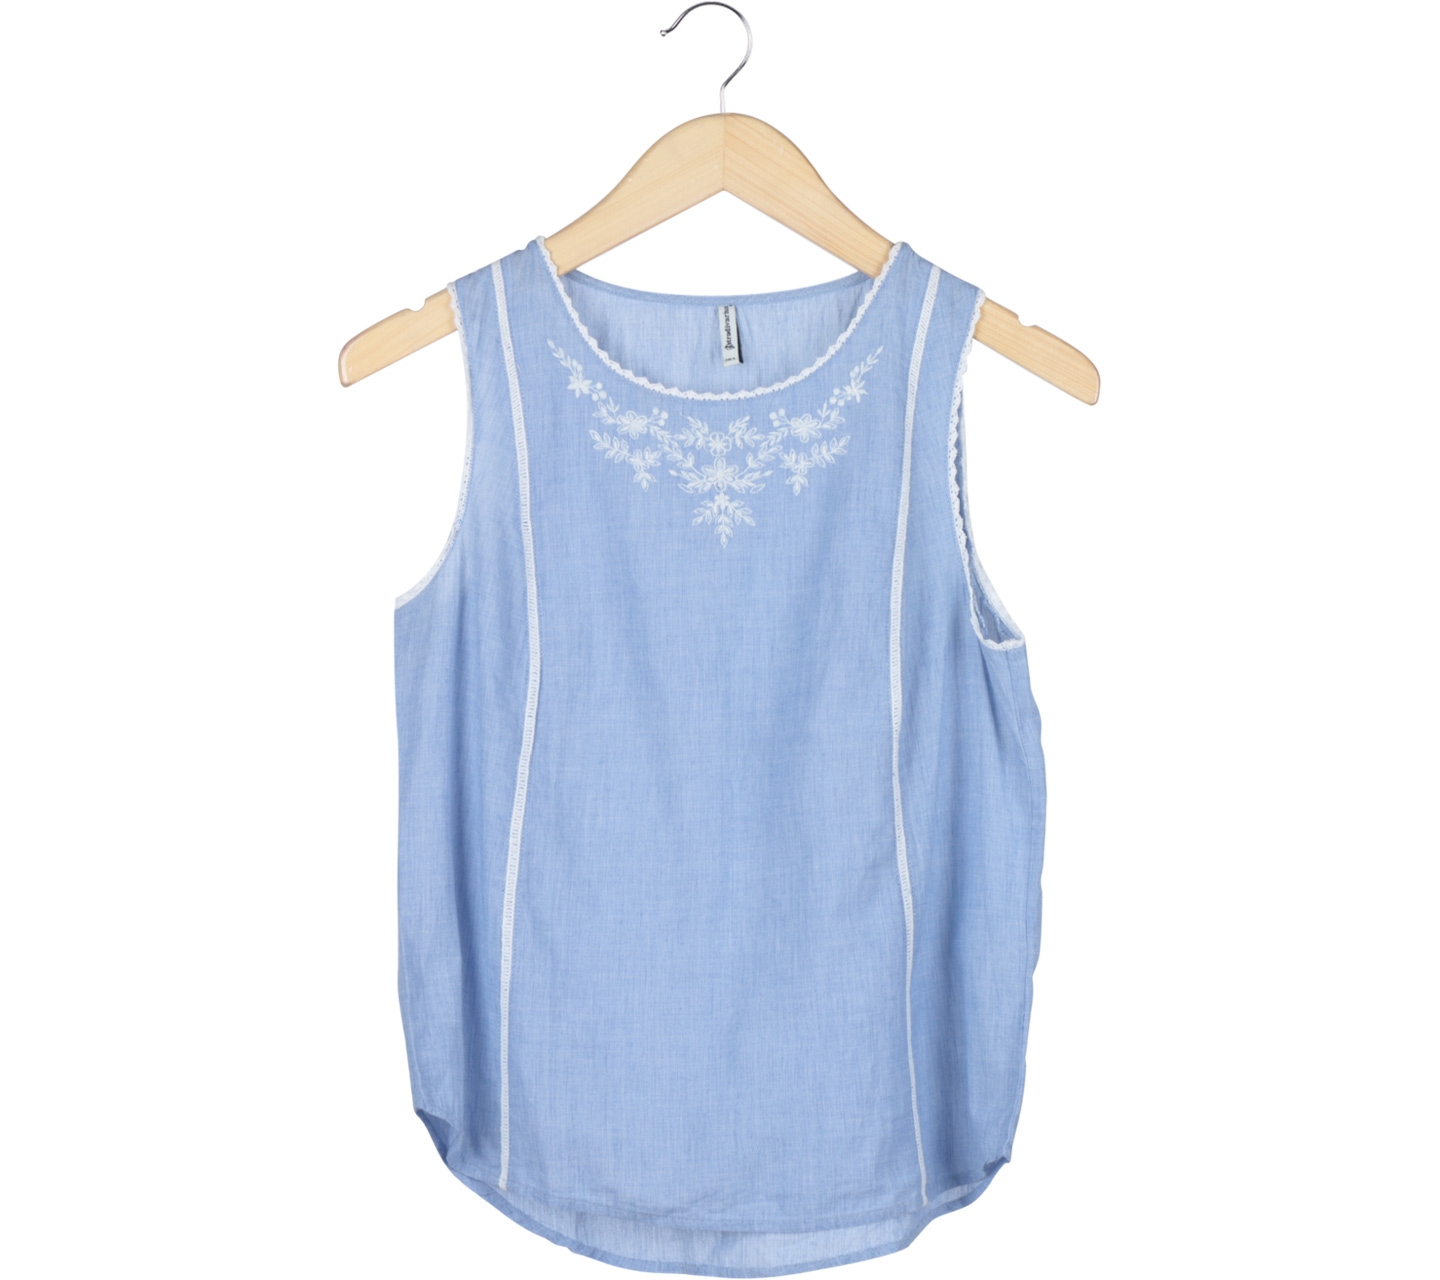 Stradivarius Blue And White Floral Sleeveless Embroidery Blouse